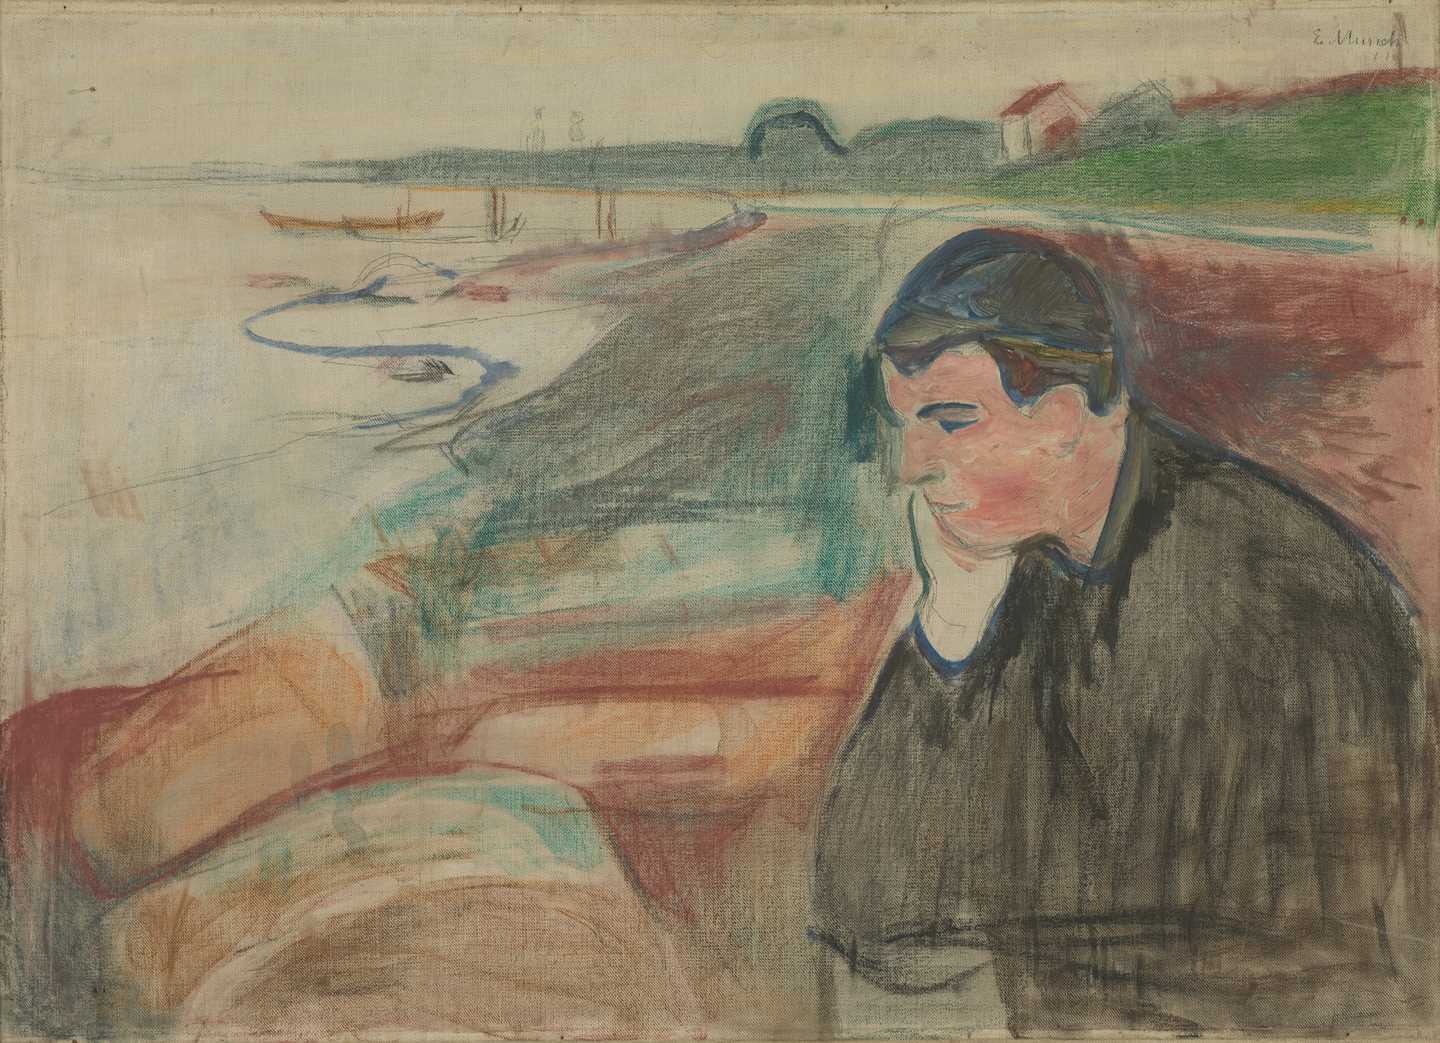 Edvard Munch: Evening. Melancholy. Oil, pencil and color pen on canvas, 1891. Photo © Munchmuseet